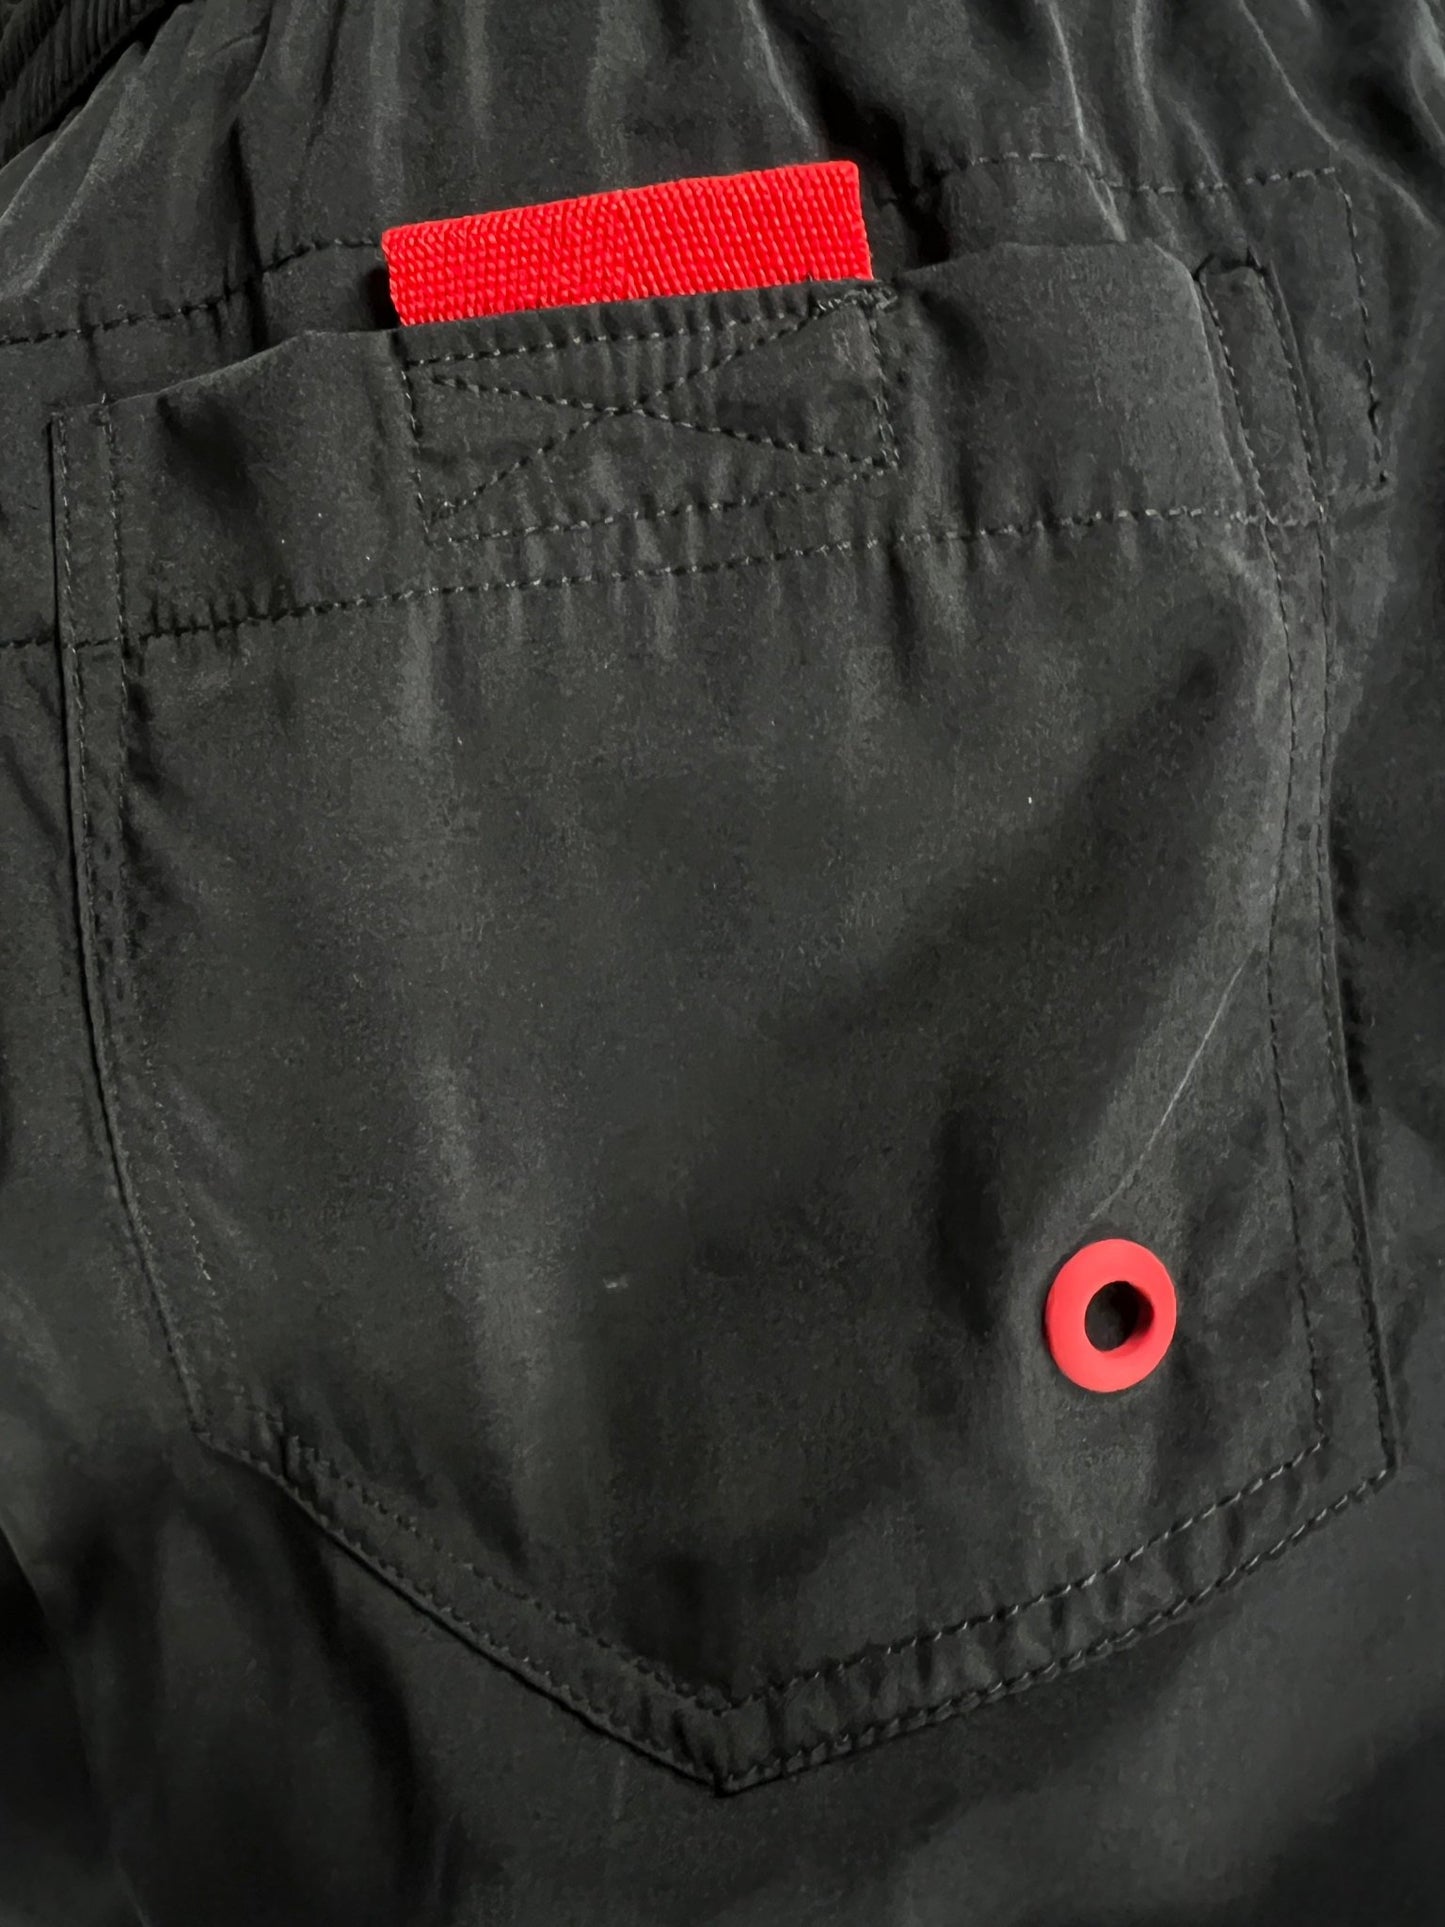 Black DIESEL BMBX-MARIO-34 shorts with a red tag on the back pocket and a red buttonhole, made from 100% Polyester.